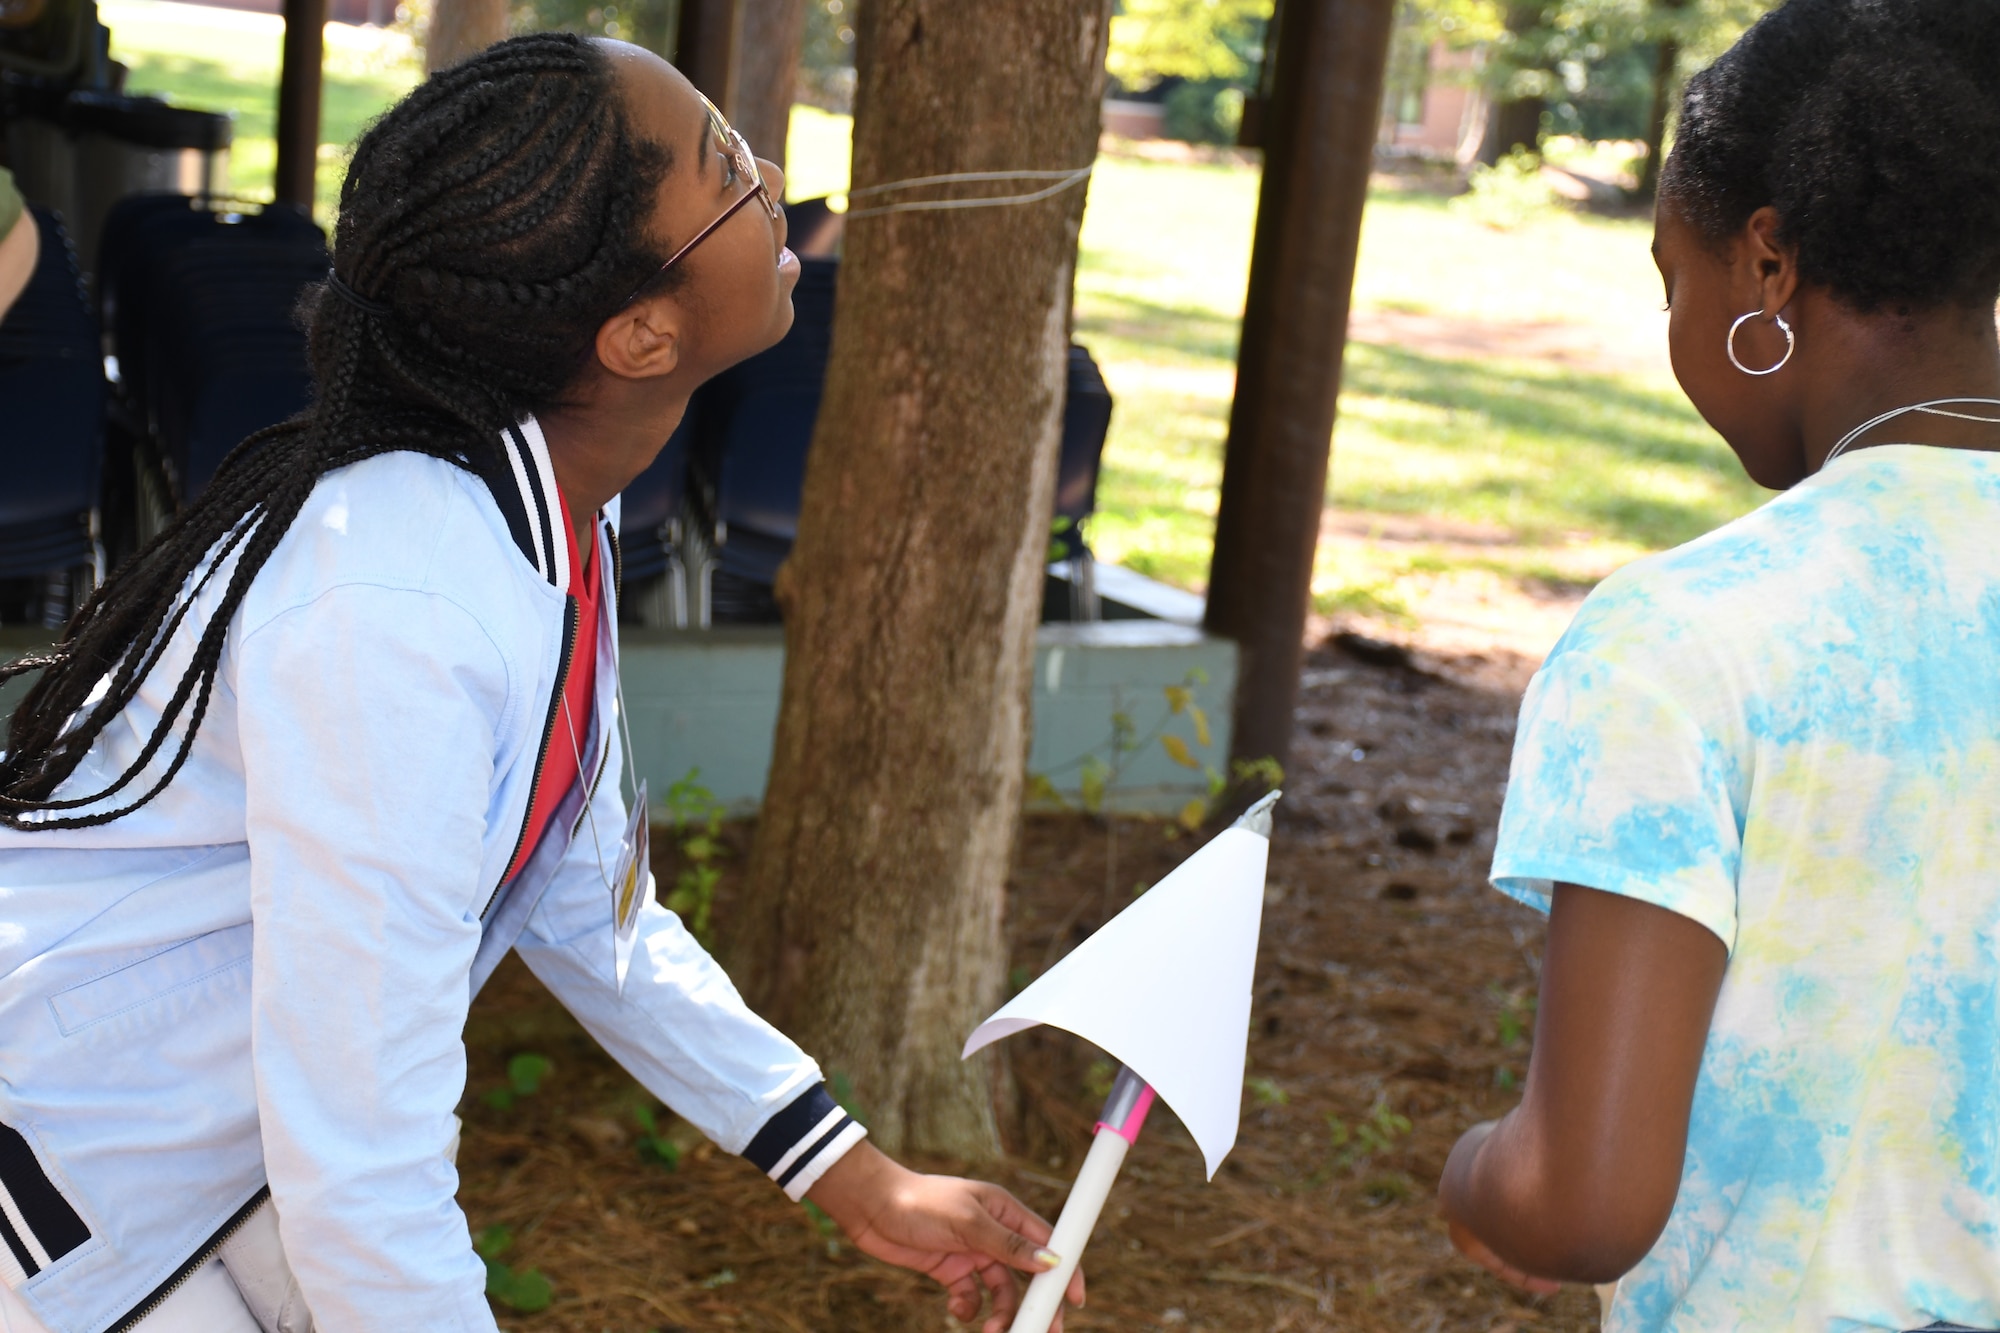 Two middle school female youth attach their rocket to its assembly to test their engineering design at Rock Eagle 4-H Center in Eatonton, Ga., Aug 17, 2019.  The Air Force and space focused programming allowed youth to question and hear from Air Force personnel.    (U.S. Air Force photo by 1st Lt. Casey D. Mull)